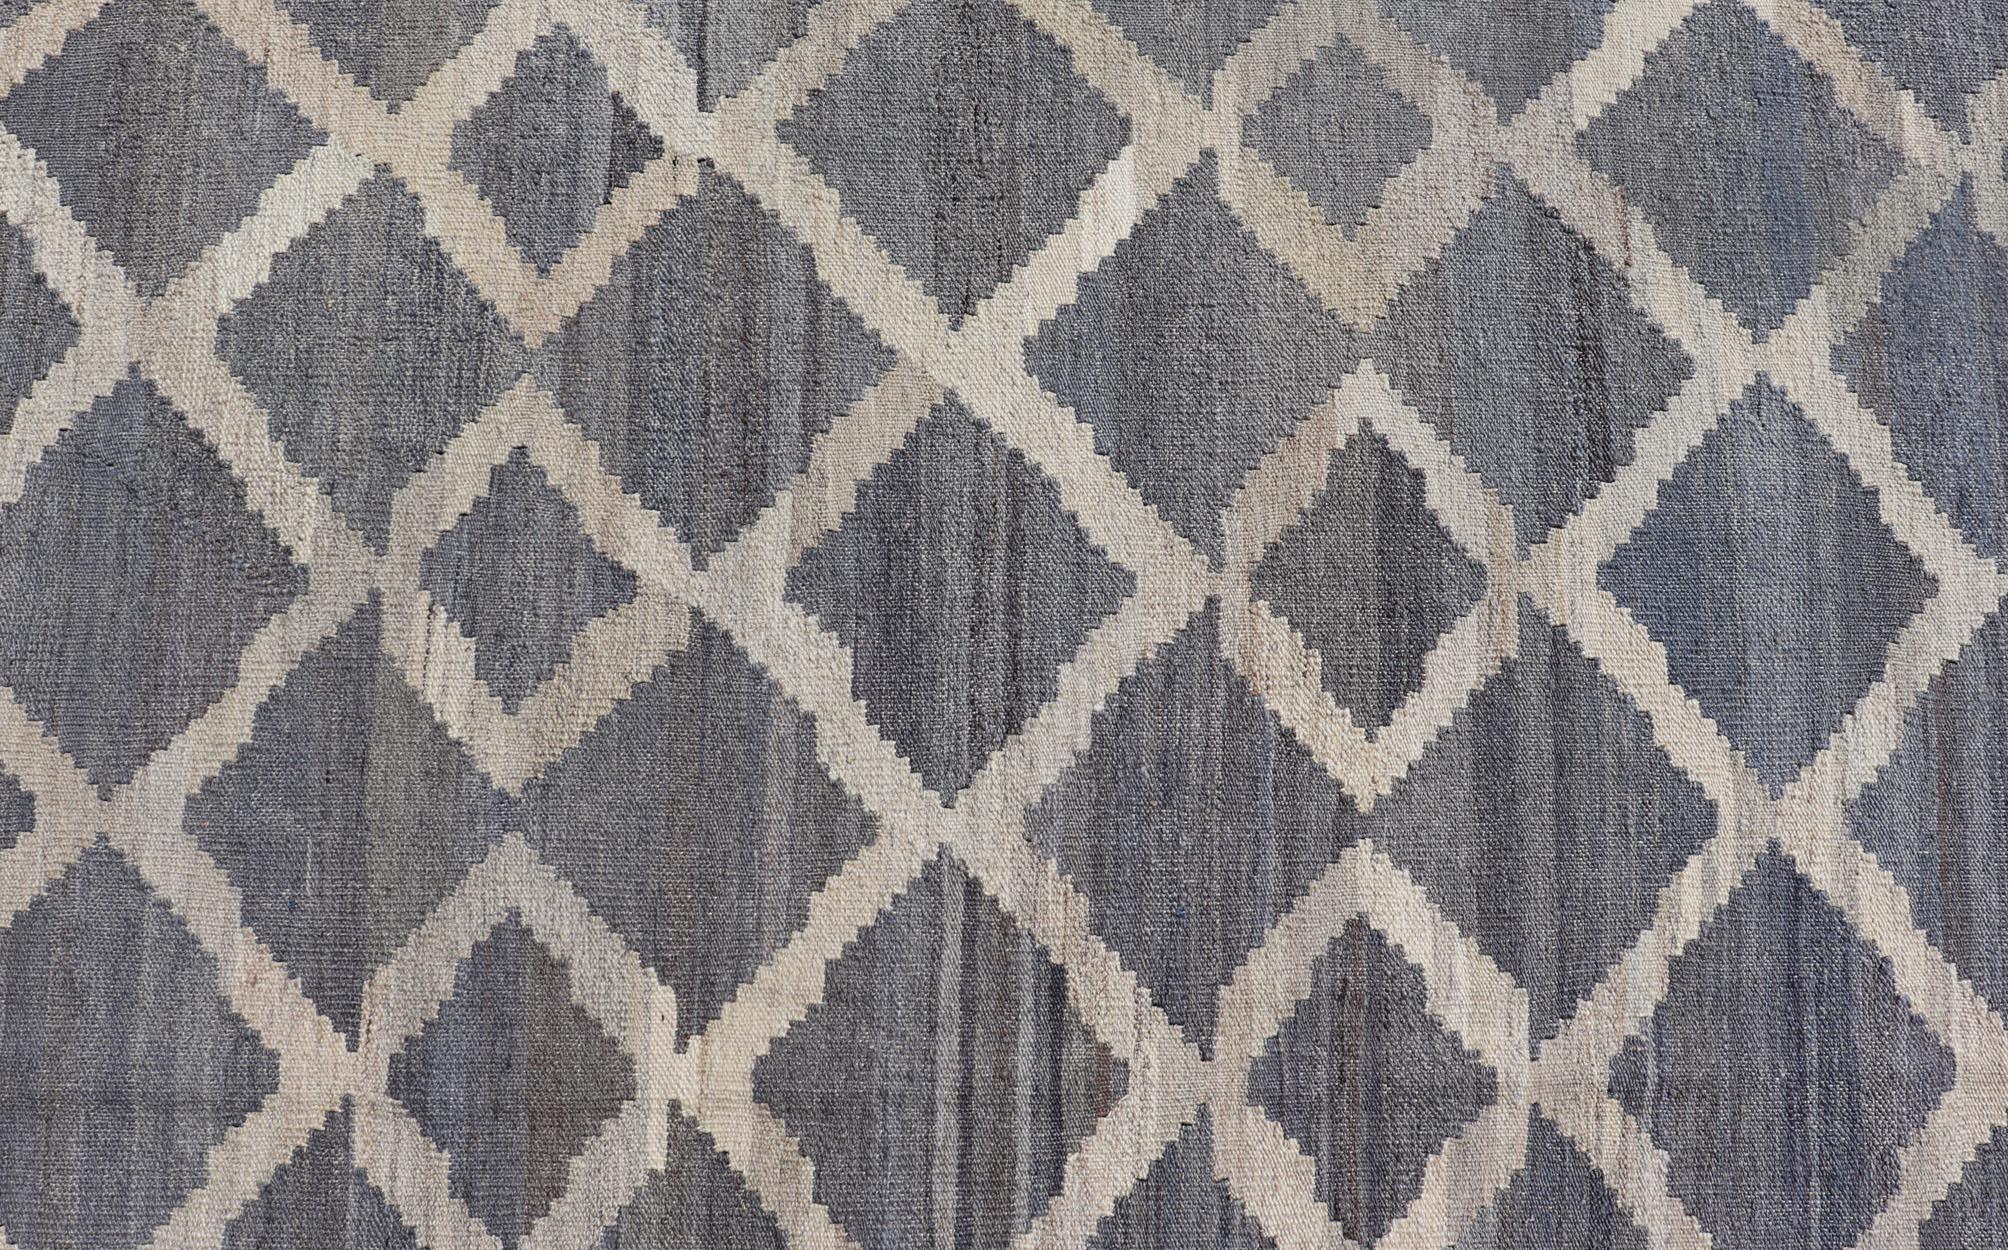 This modern flat-weave kilim has been hand-woven. The rug features a modern sub-geometric interlocked diamond design, rendered in blues, grays and cream; making this rug a superb fit for a variety of classic, modern, casual and minimalist